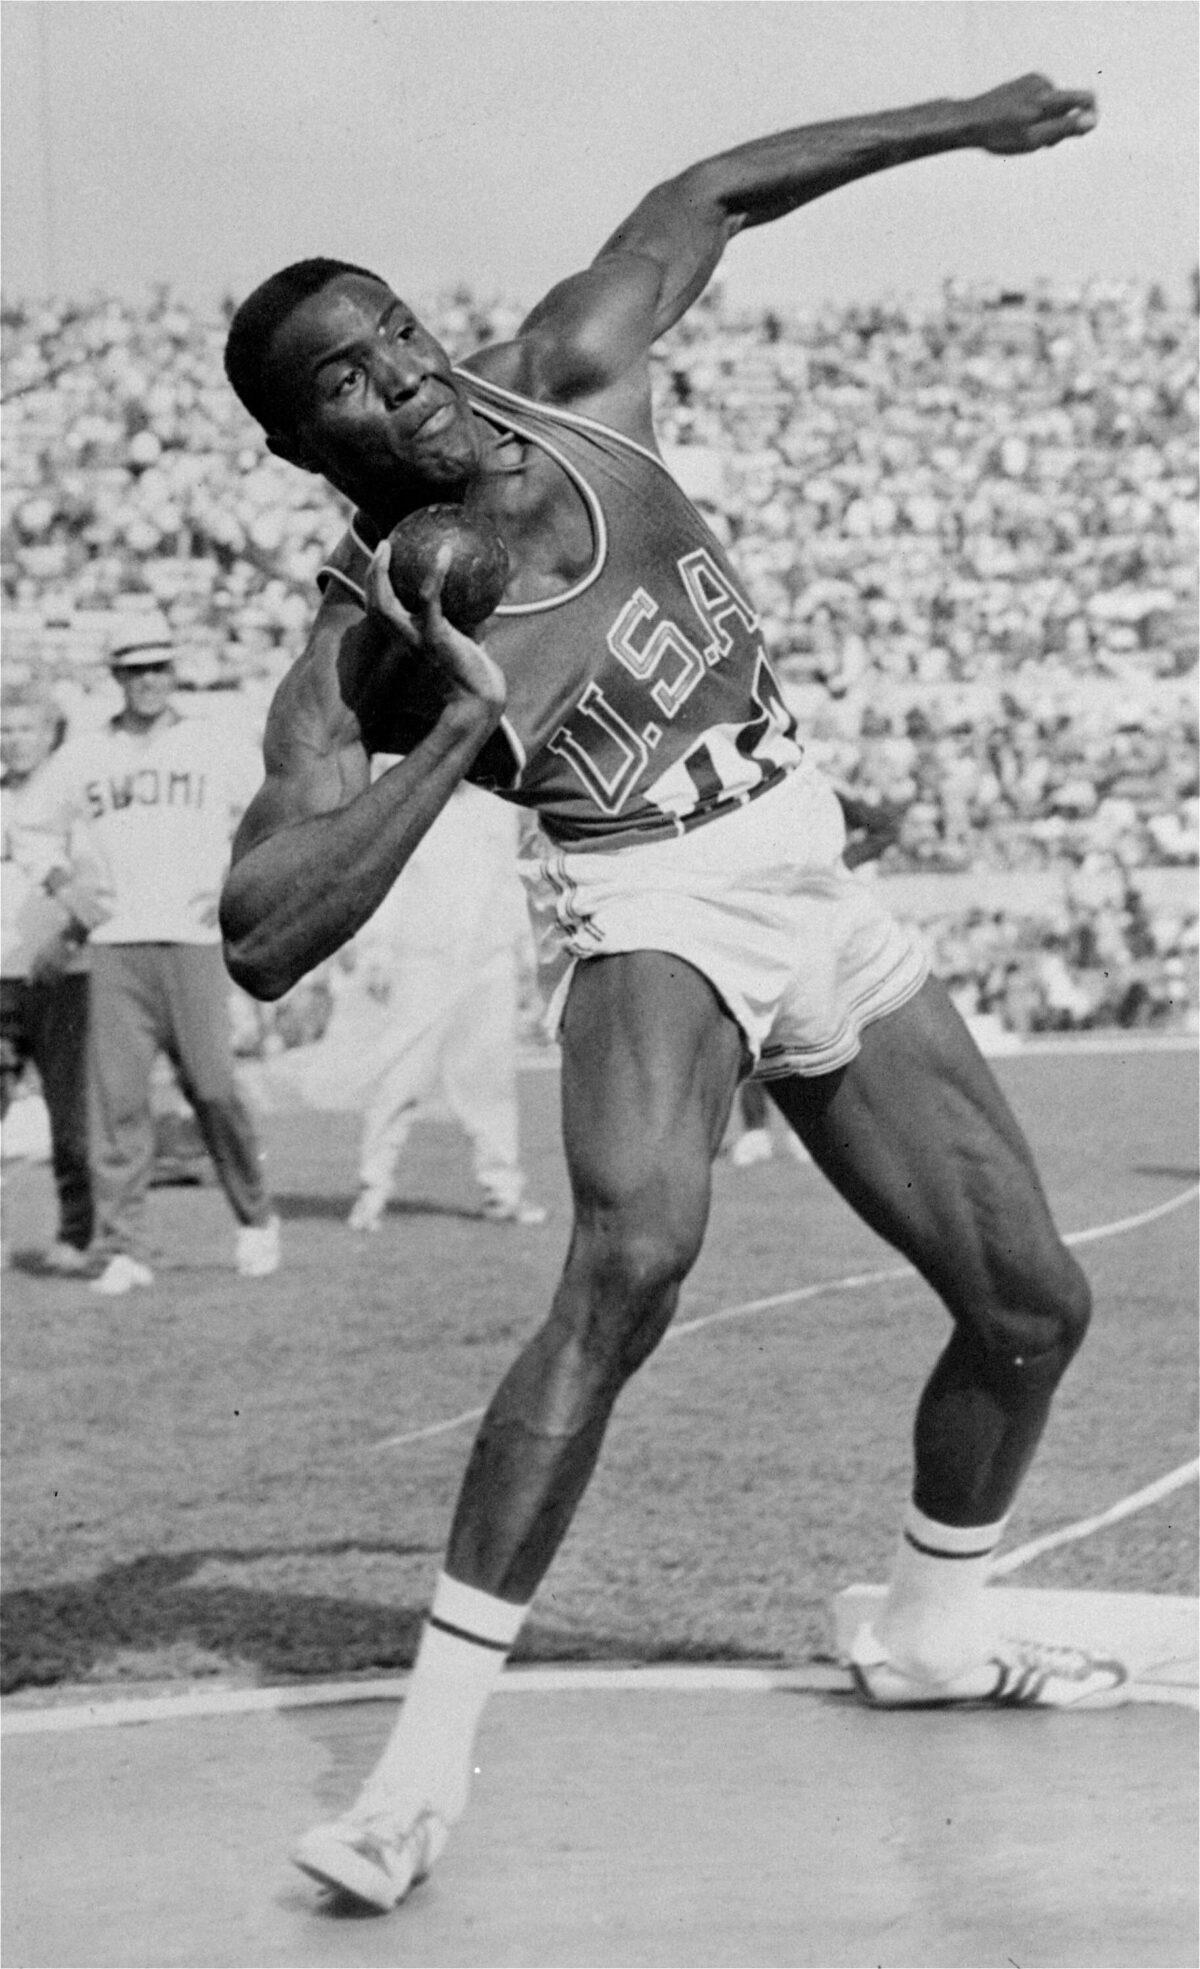 Rafer Johnson competes in the shot put event of the Olympic decathlon competition in Rome, Italy, on Sept. 5, 1960. (AP Photo)